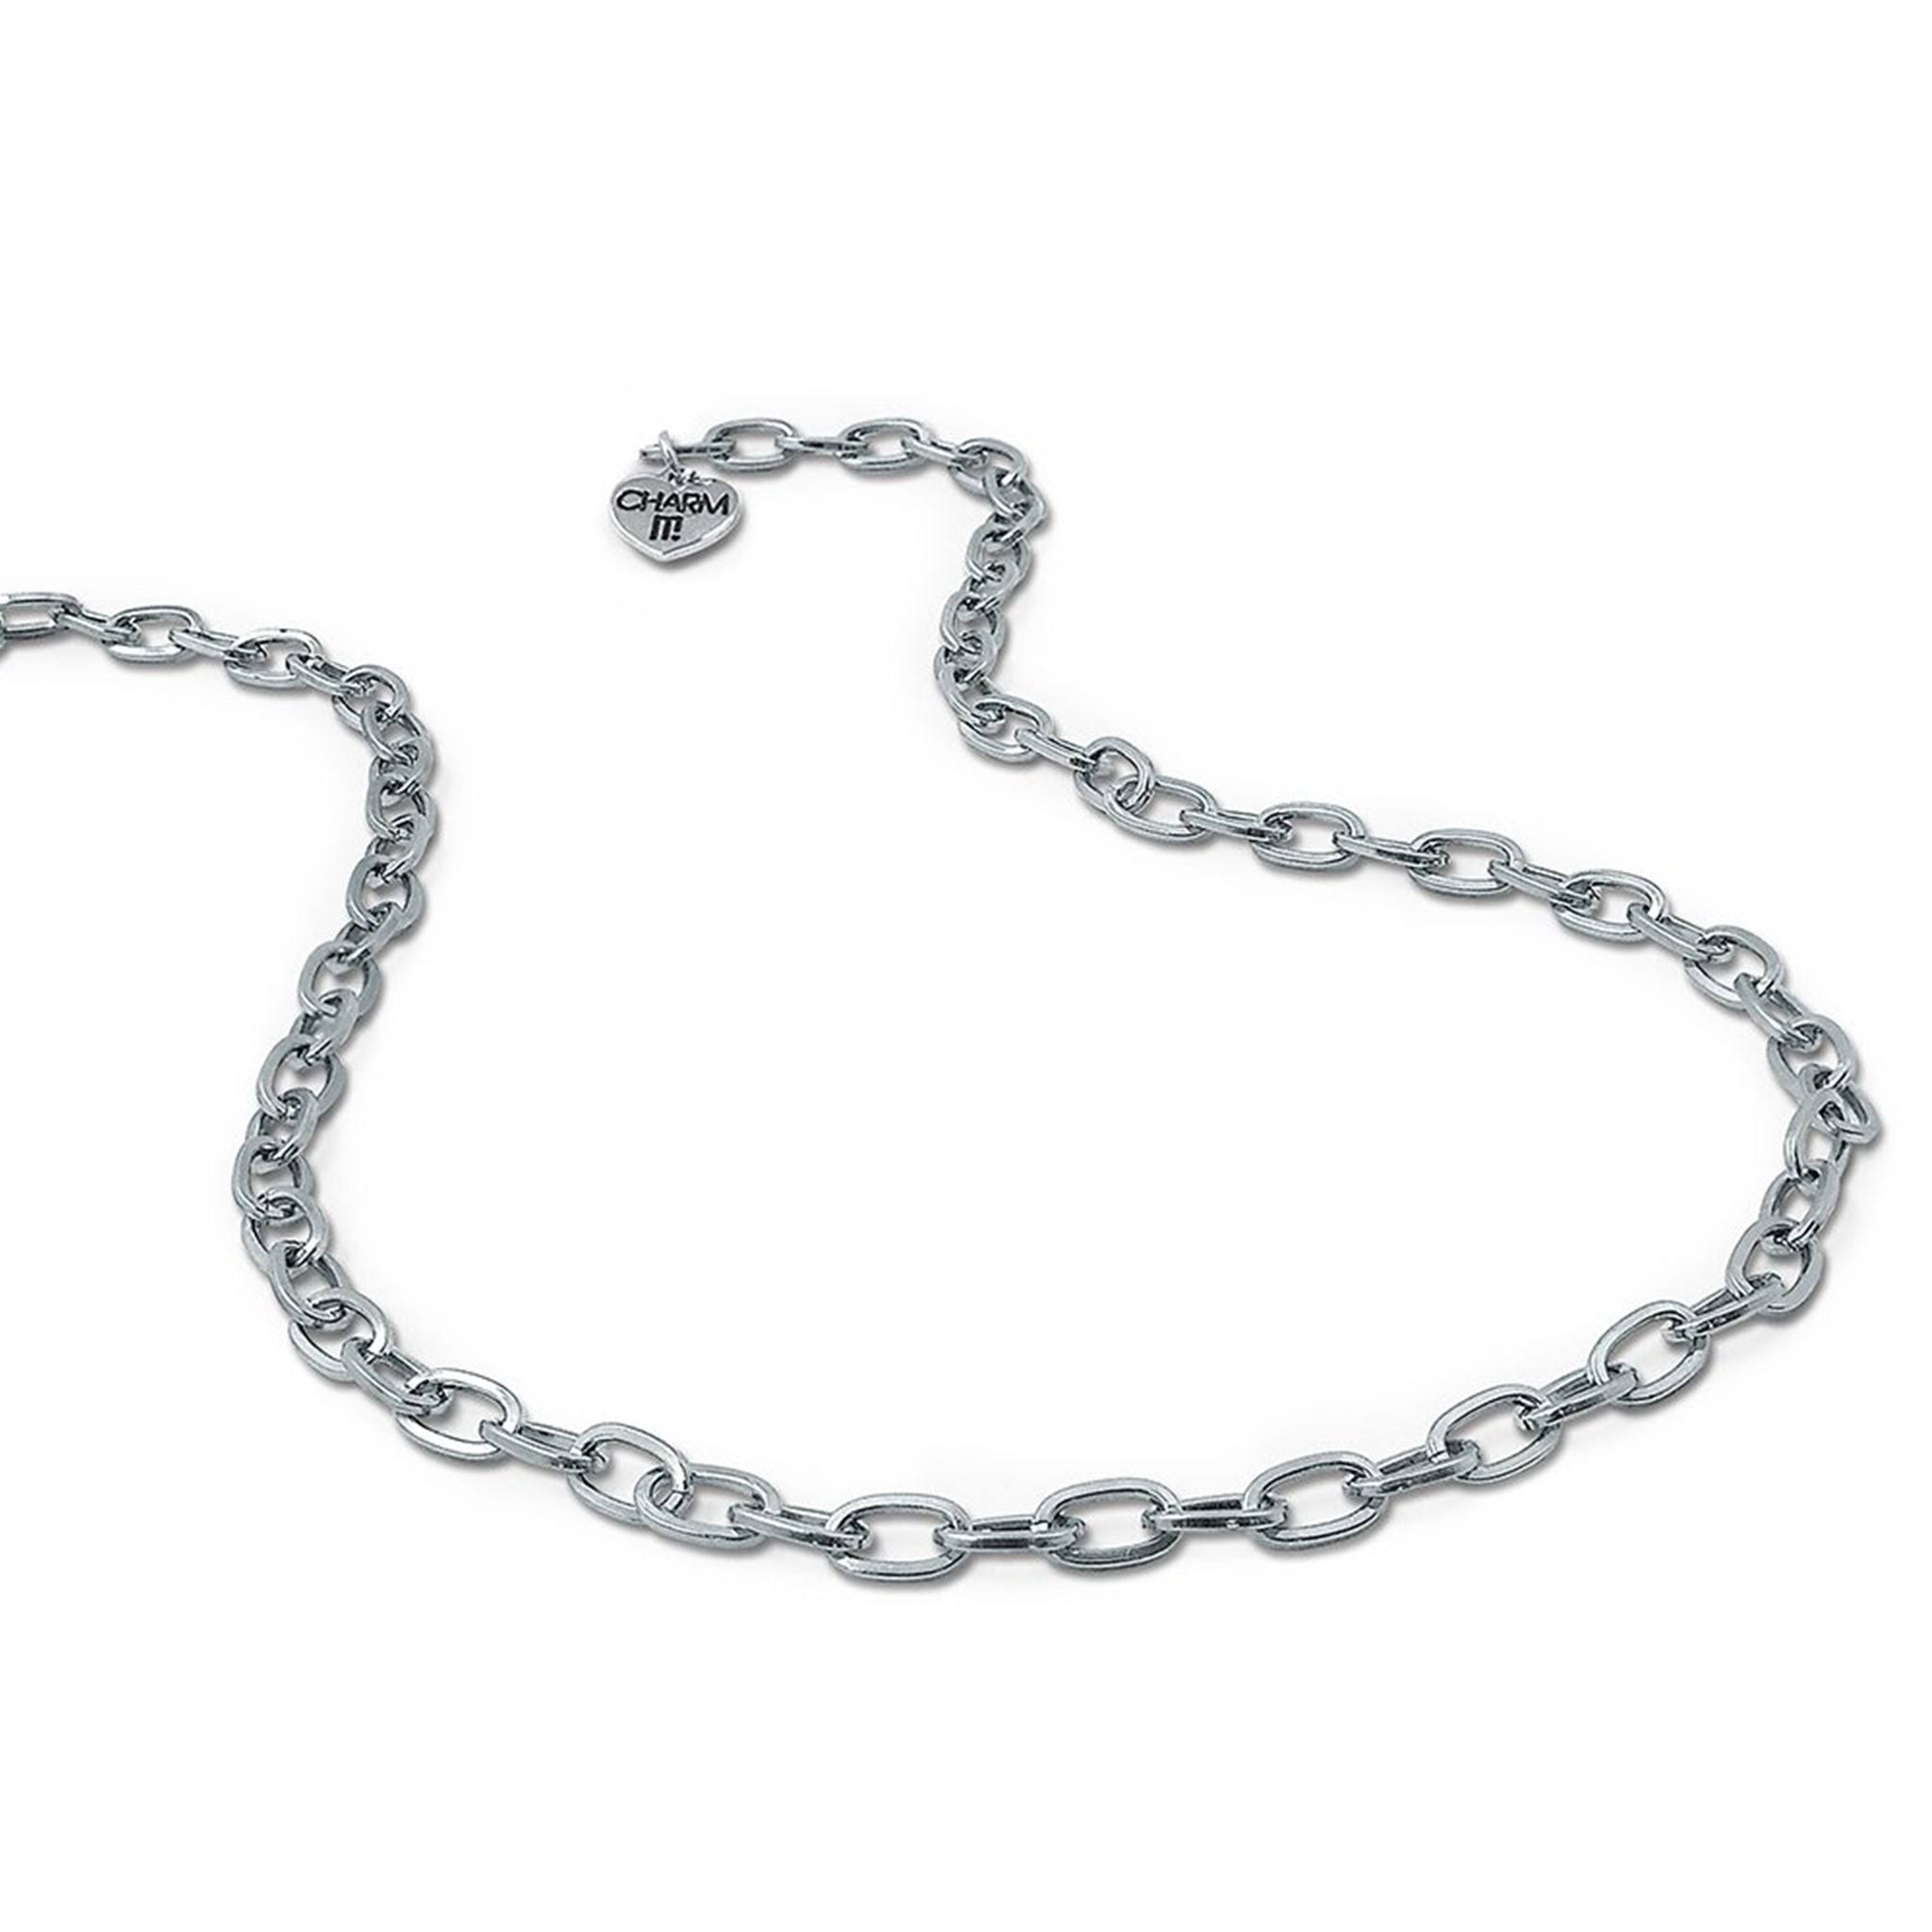 Charm It! Chain Necklace - Silver